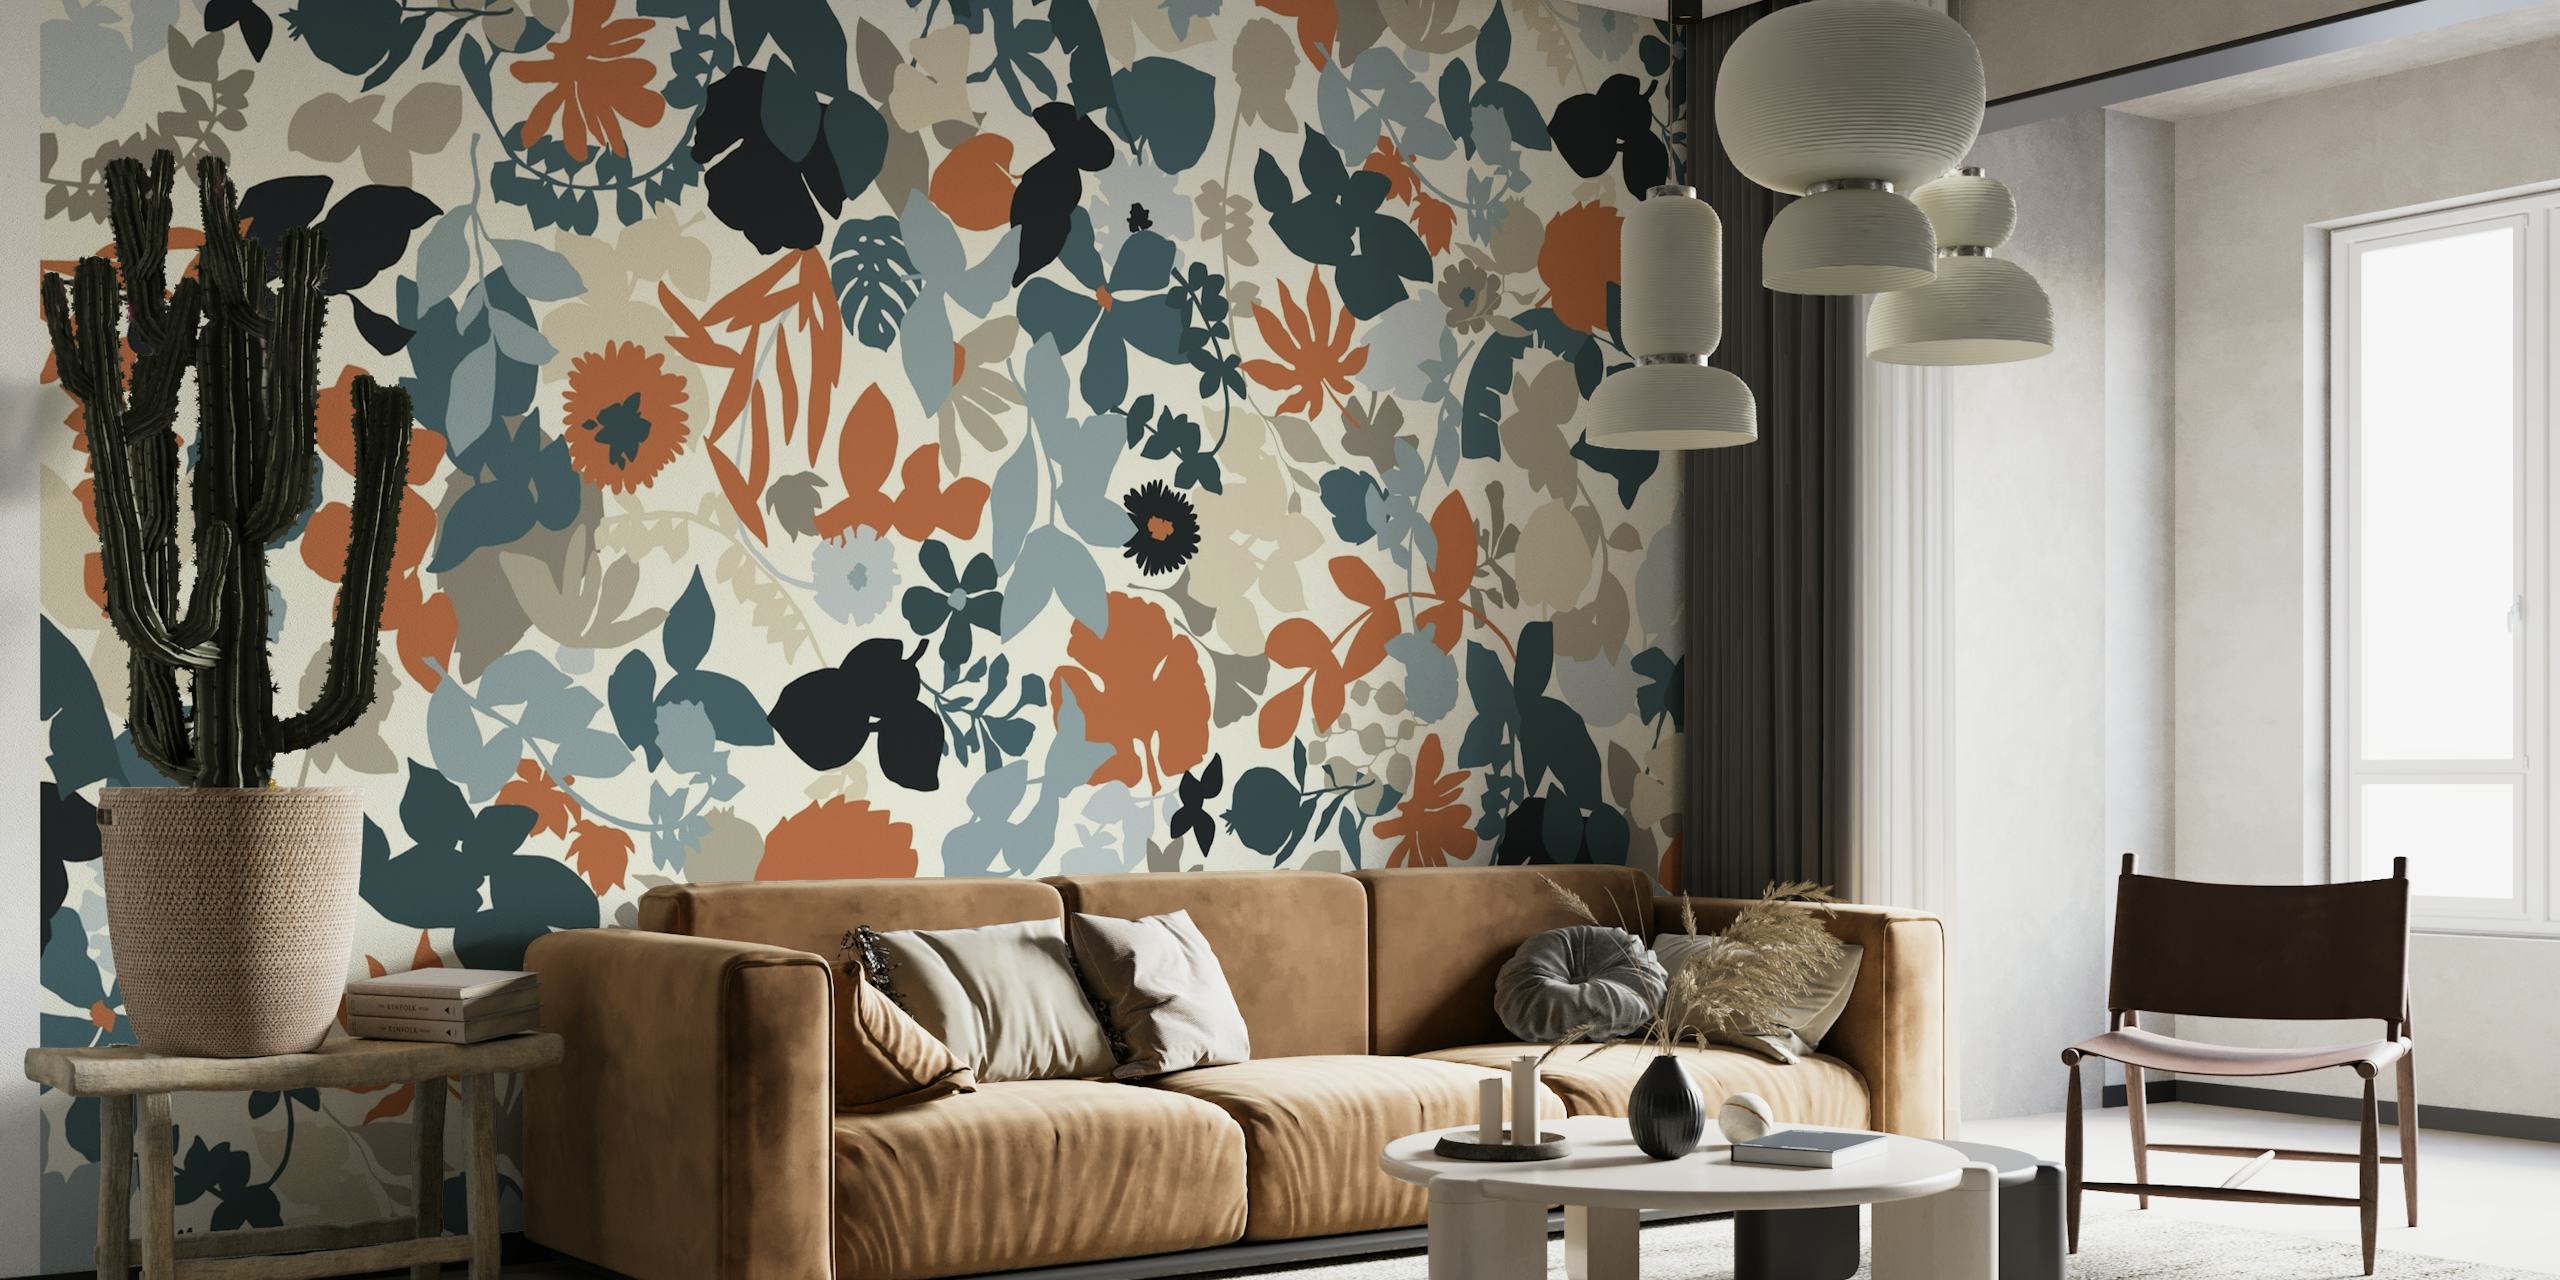 Botanical patterned wallpaper in rust blue and grey tones